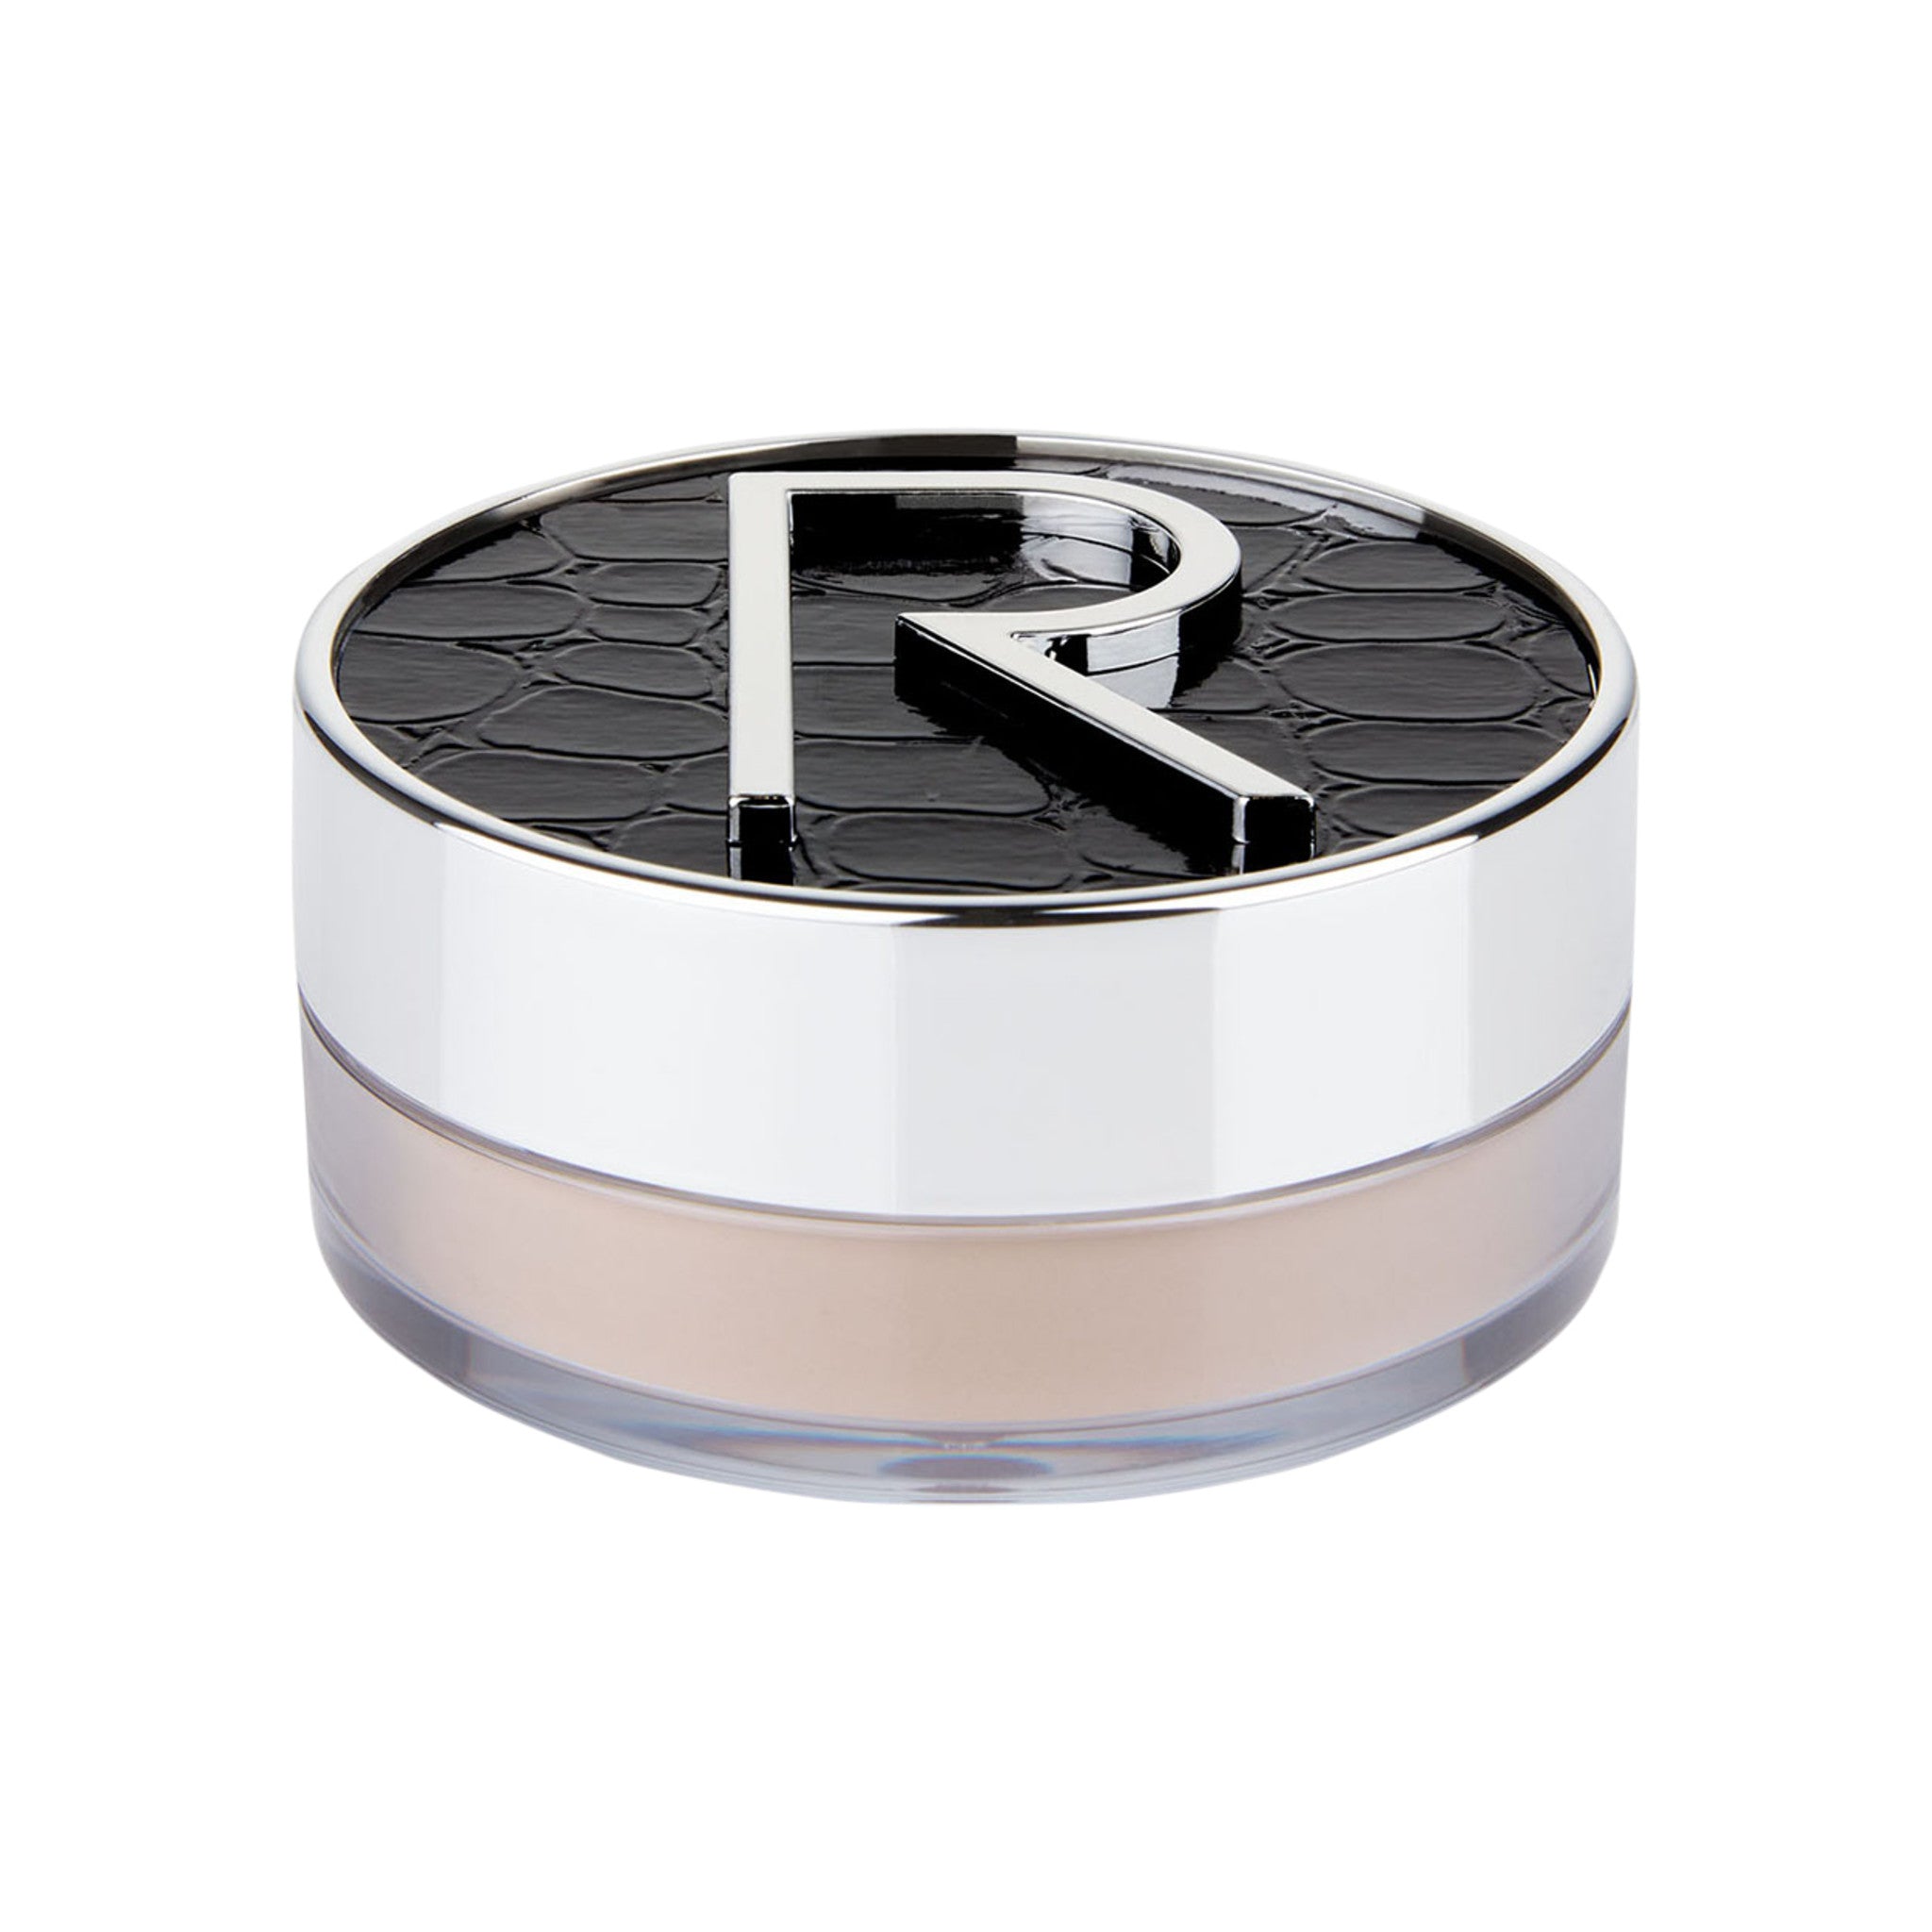 Rodial Glass Powder main image. This product is in the color nude, for light and medium and deep complexions